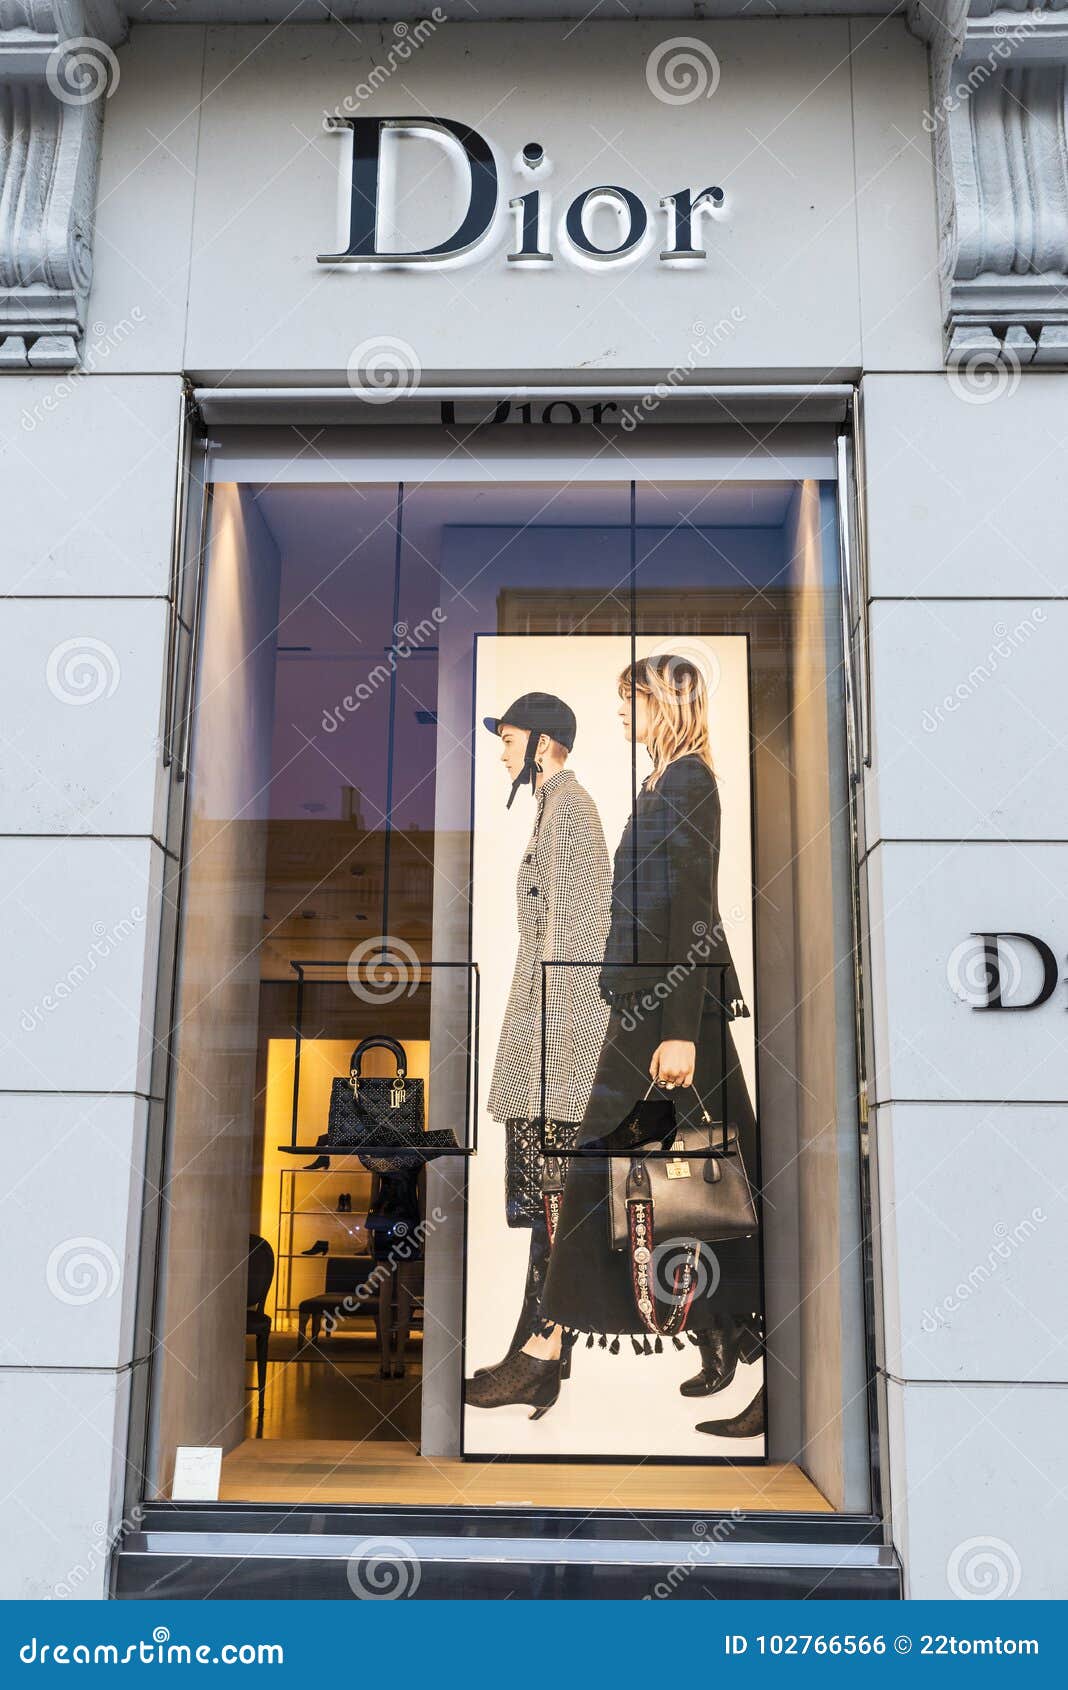 Dior Shop in Brussels, Belgium Editorial Photo - Image of shoe ...